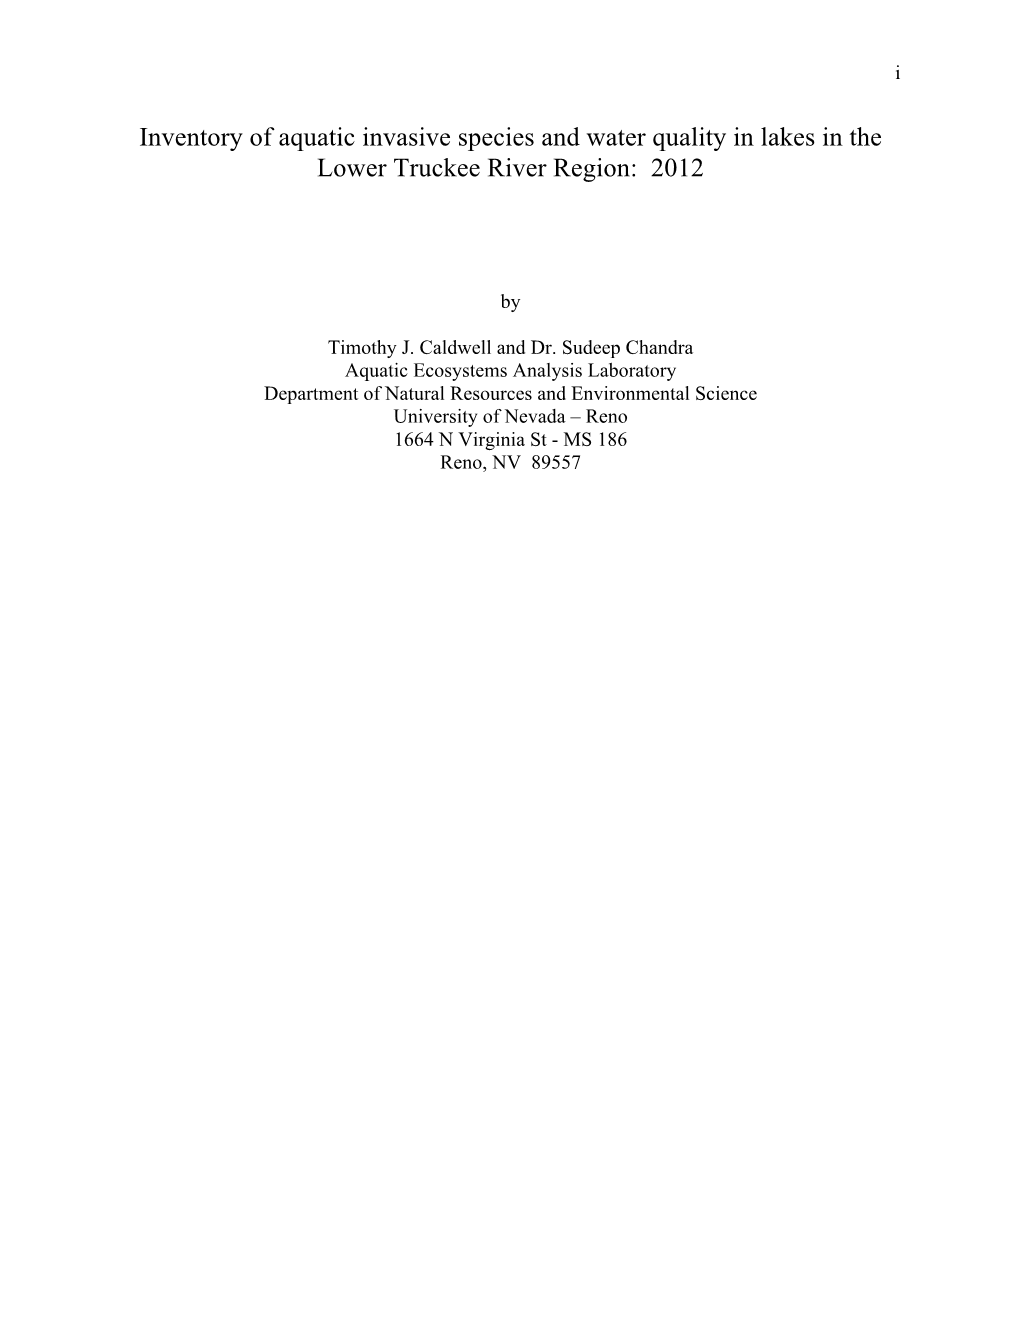 Inventory of Aquatic Invasive Species and Water Quality in Lakes in the Lower Truckee River Region: 2012